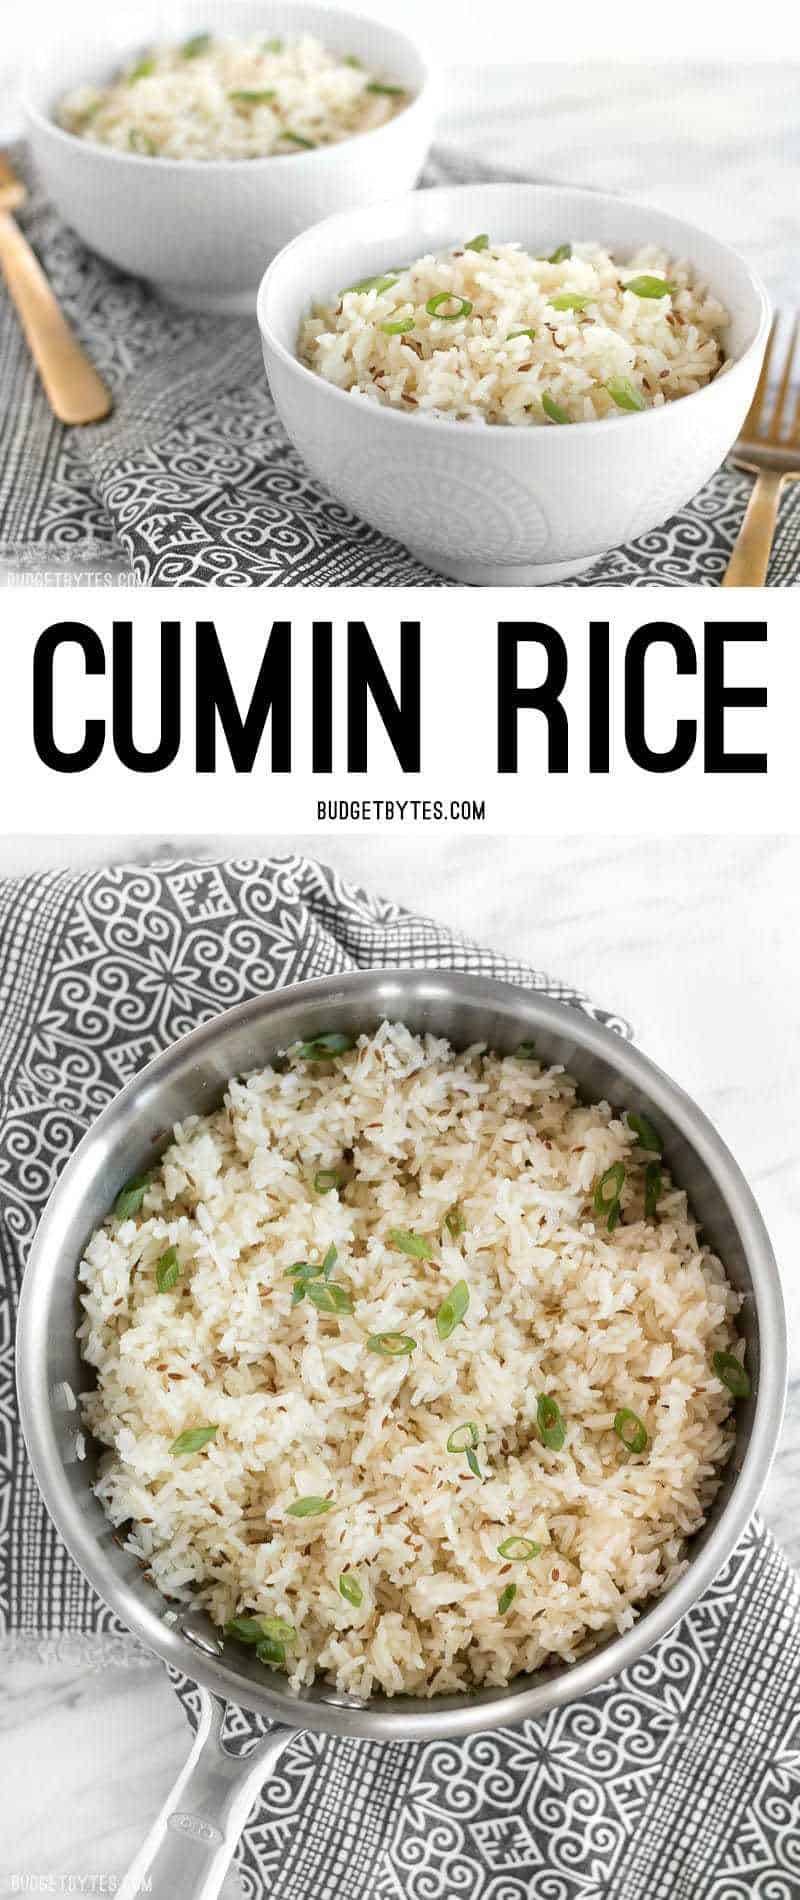 Cumin rice is an earthy and slightly peppery dish that can be used as the base for many meals. BudgetBytes.com